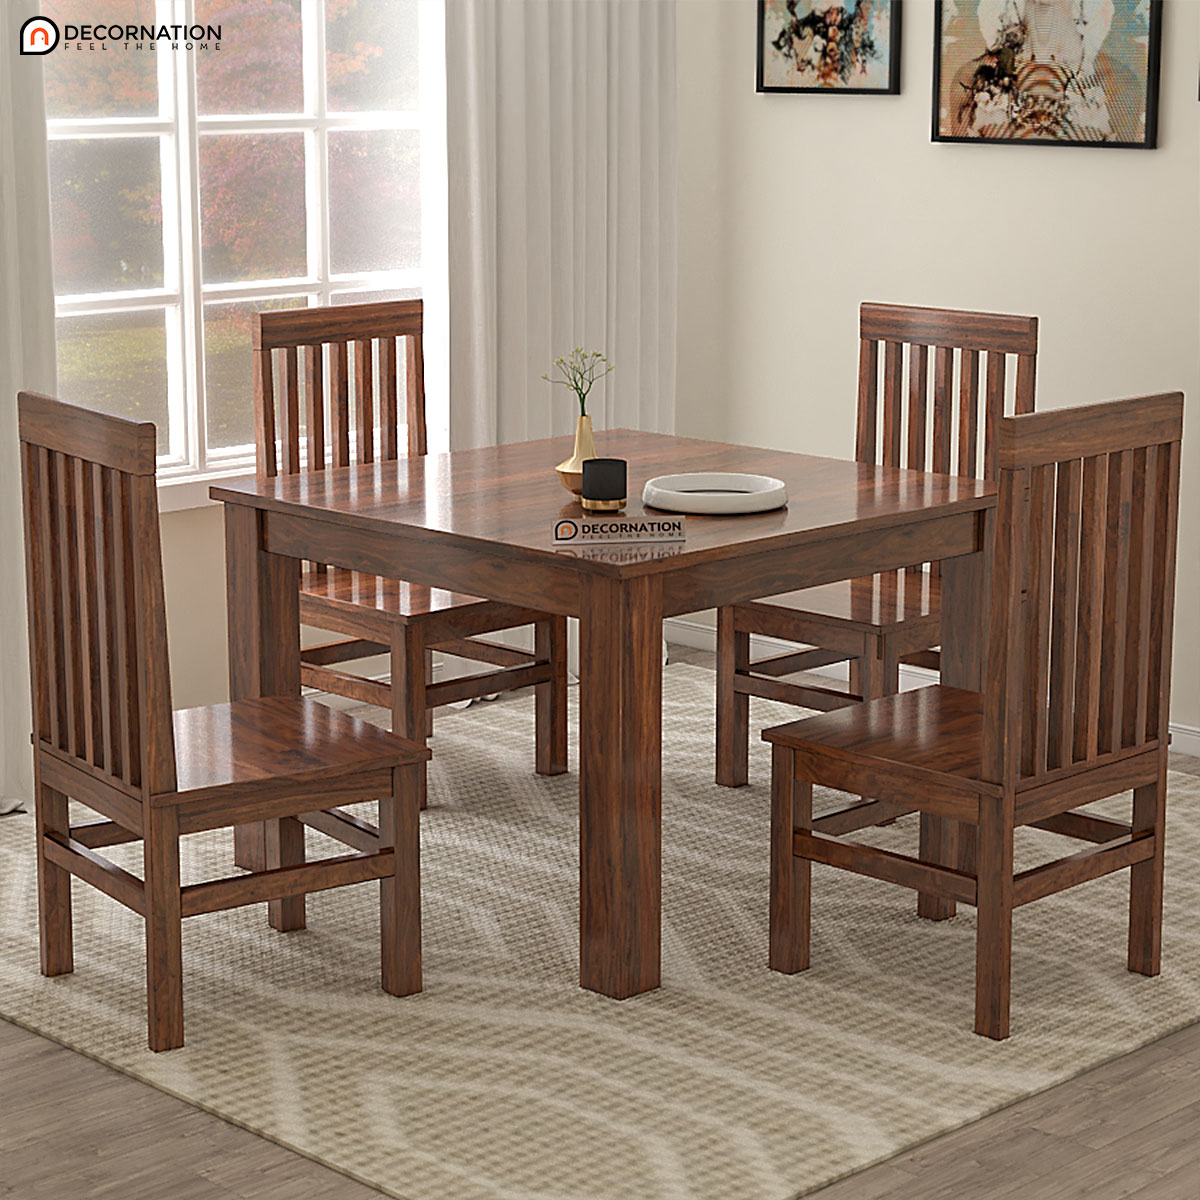 Bree 4 Seater Wooden Dining Table - Brown - Decornation